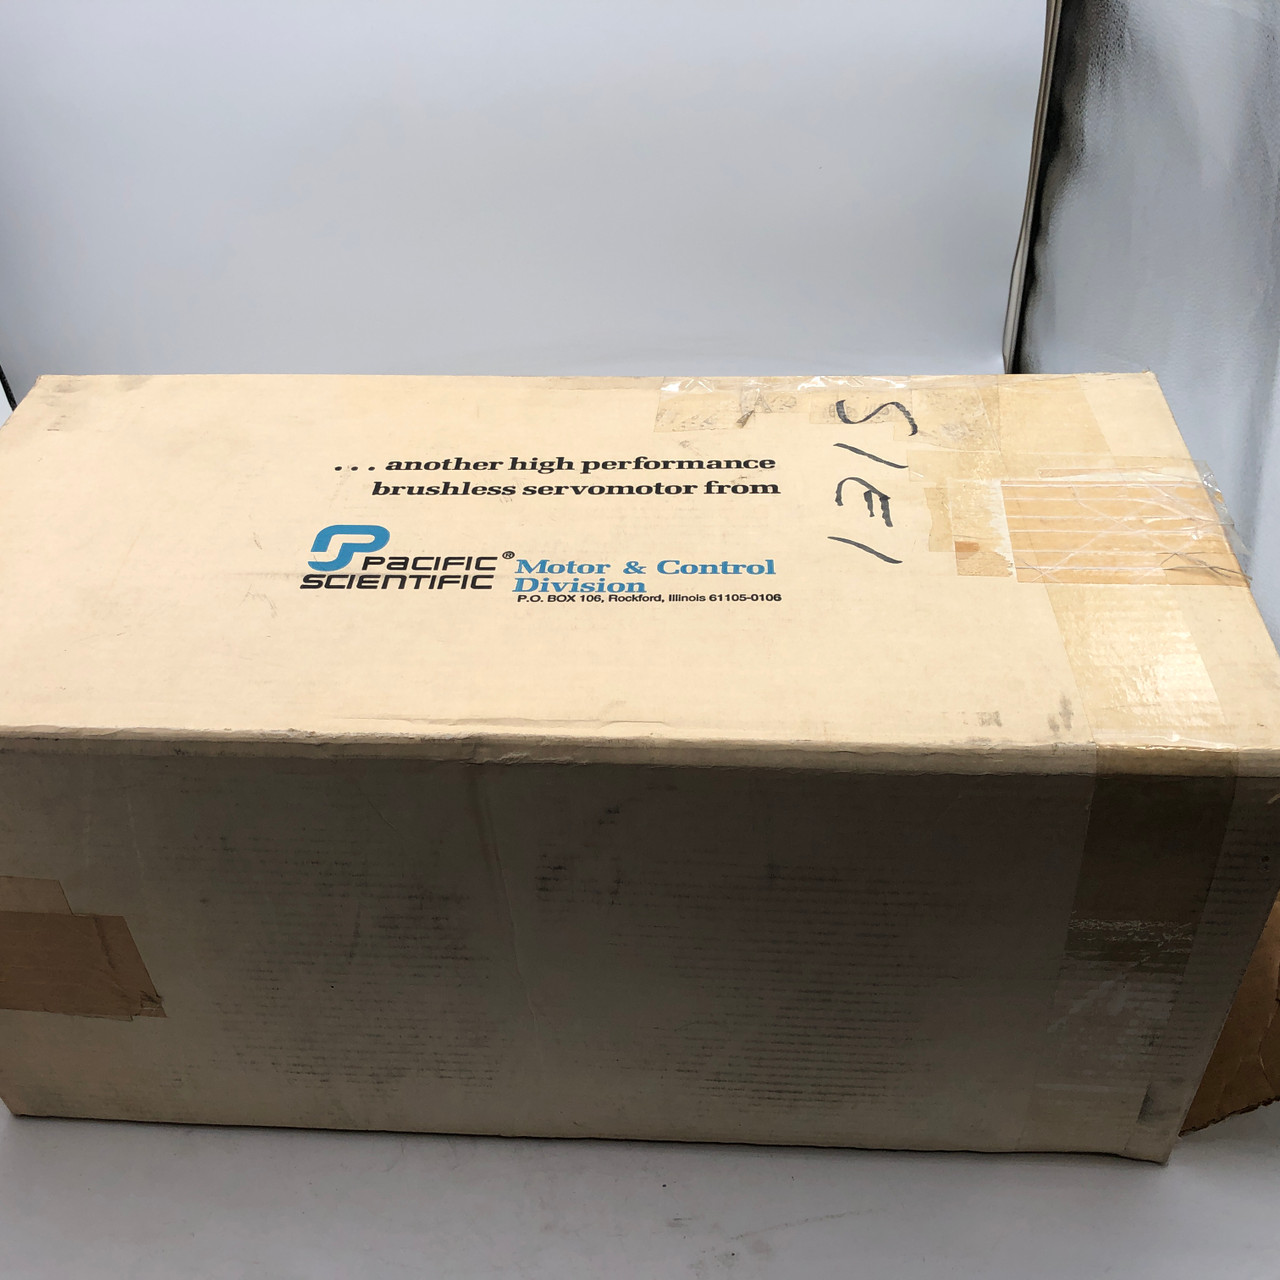 PACIFIC SCIENTIFIC R46GSNA-R2-NS-NV-04 3.7 OHMS BRUSHLESS SERVOMOTOR - NEW